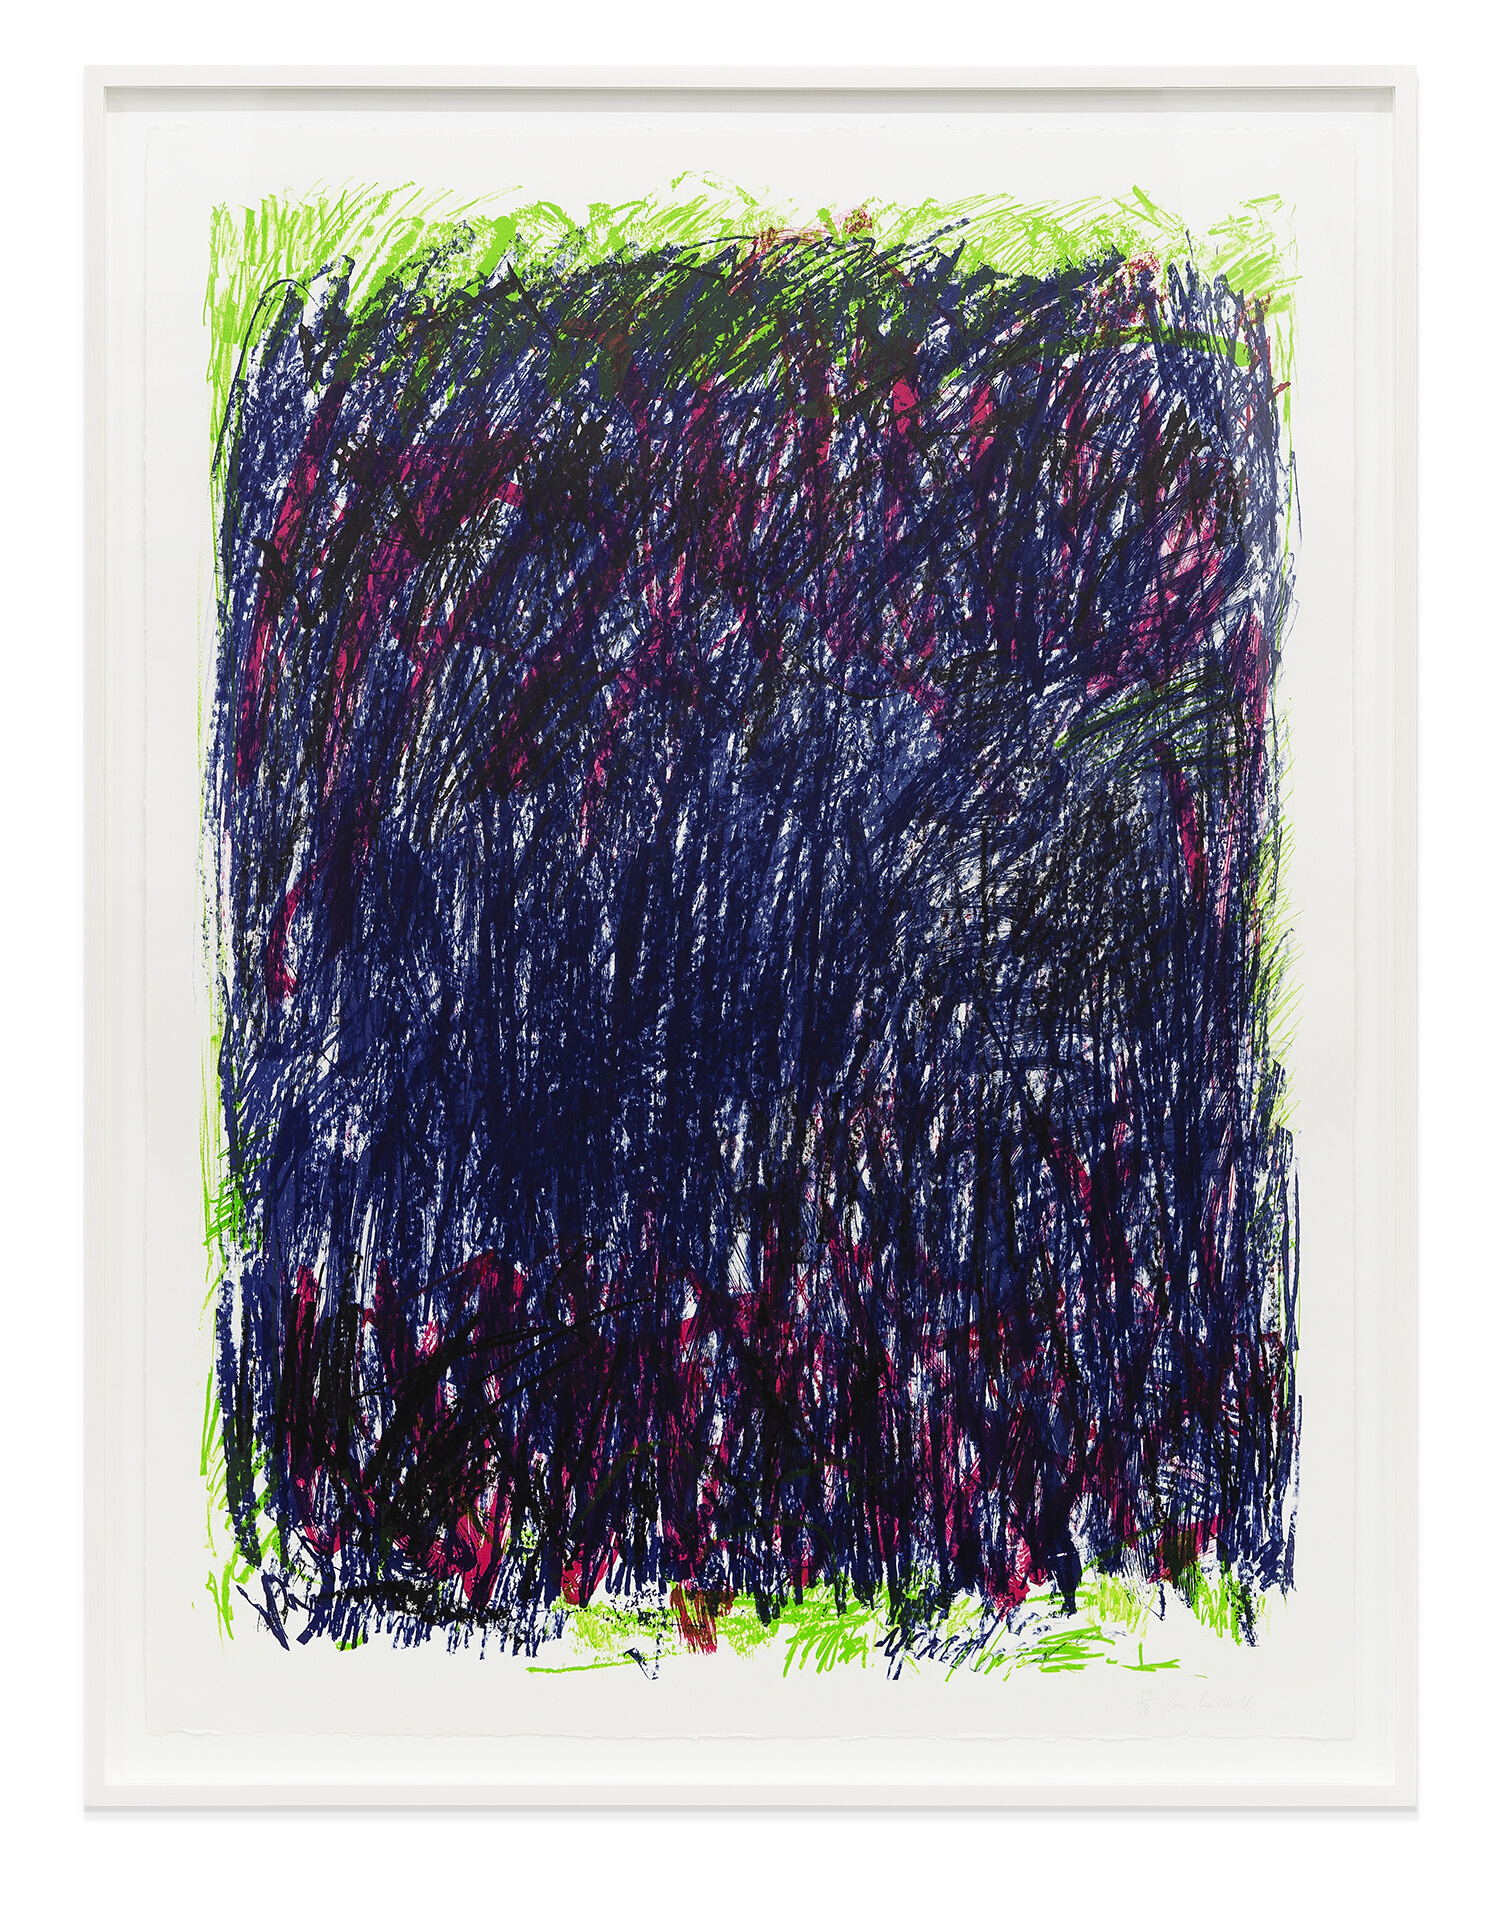 Joan Mitchell Bedford II, 1981 Lithograph 42 1/2 x 32 1/2 inches (108 x 82.6 cm) Edition of 70